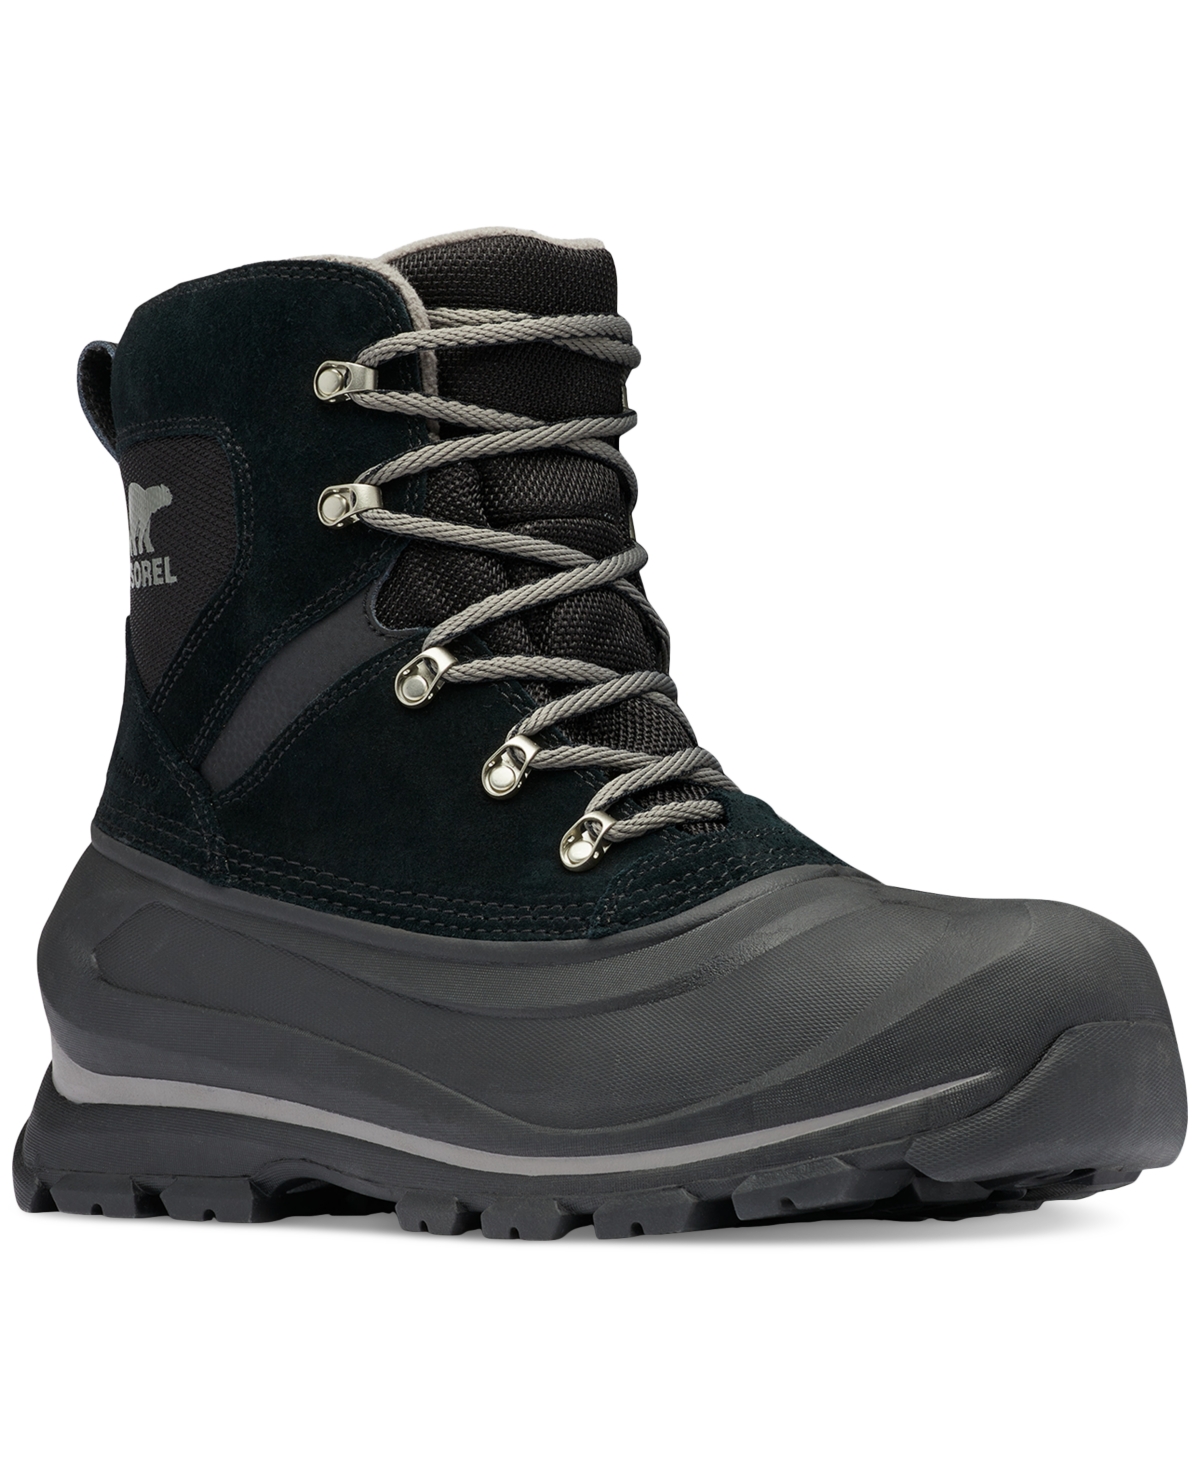 Men's Buxton Waterproof Insulated Suede Boot - Black, Quarry